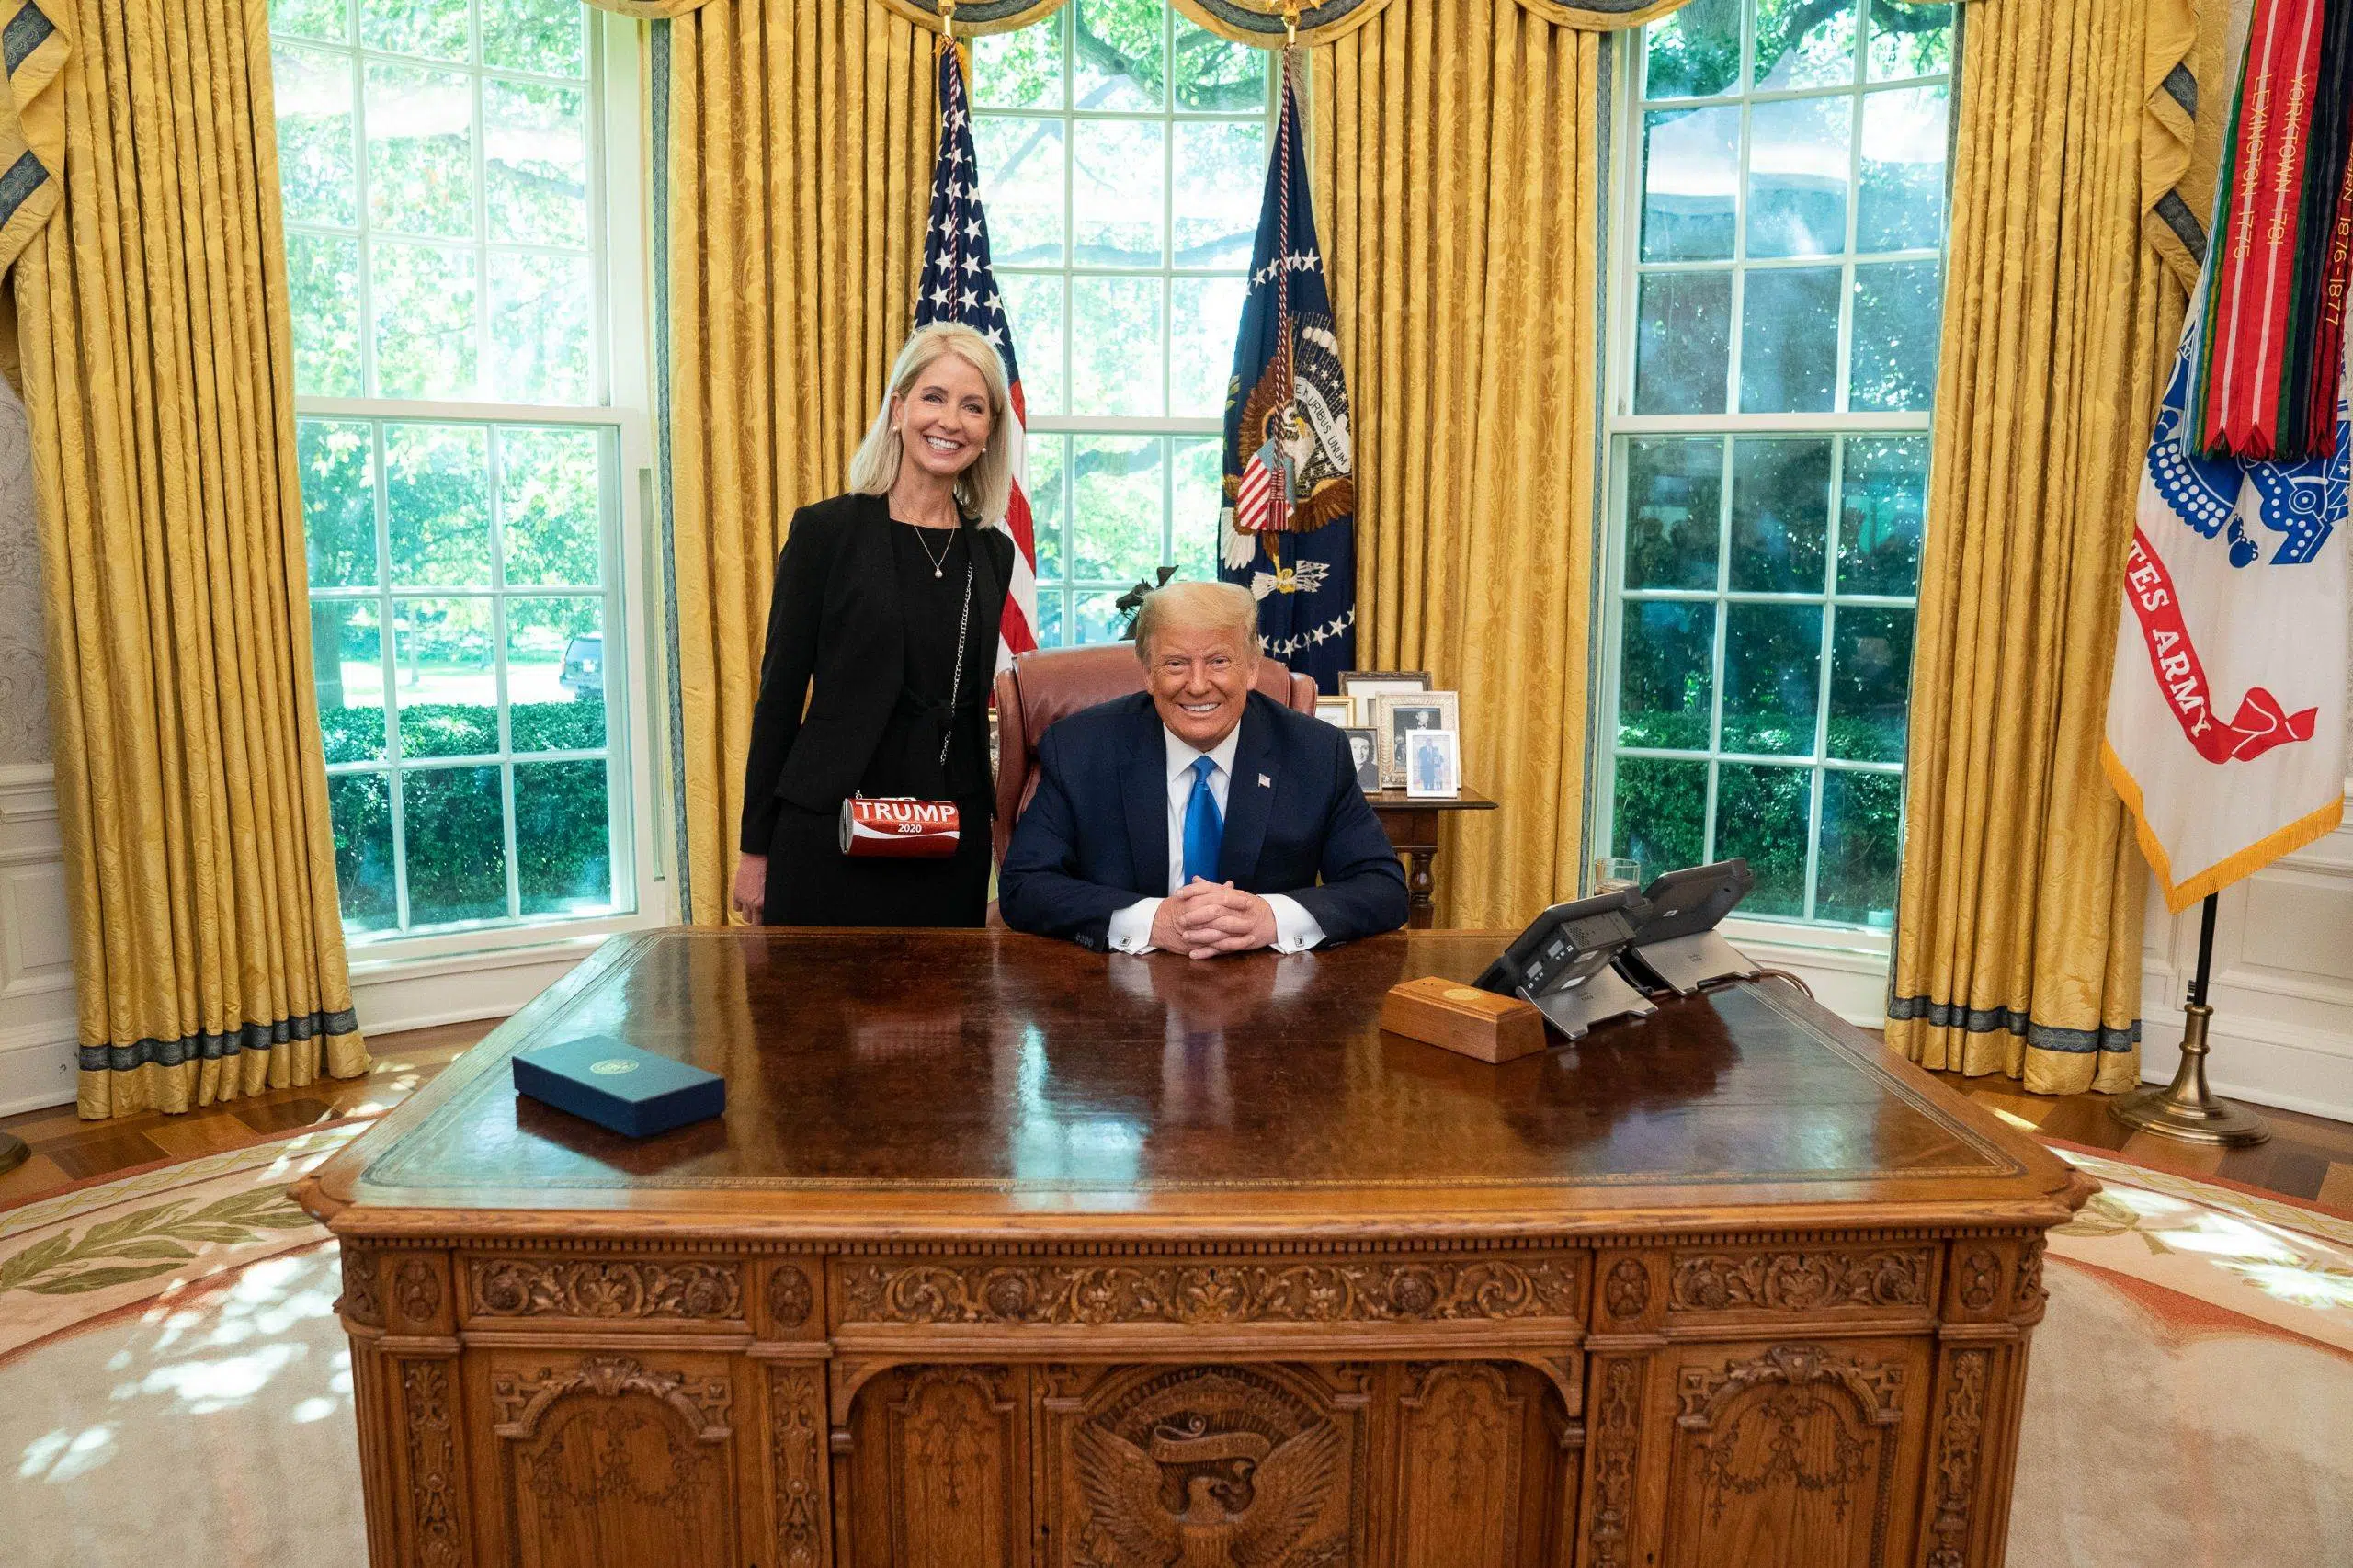  Mary Miller Meets with President Trump in Oval Office 